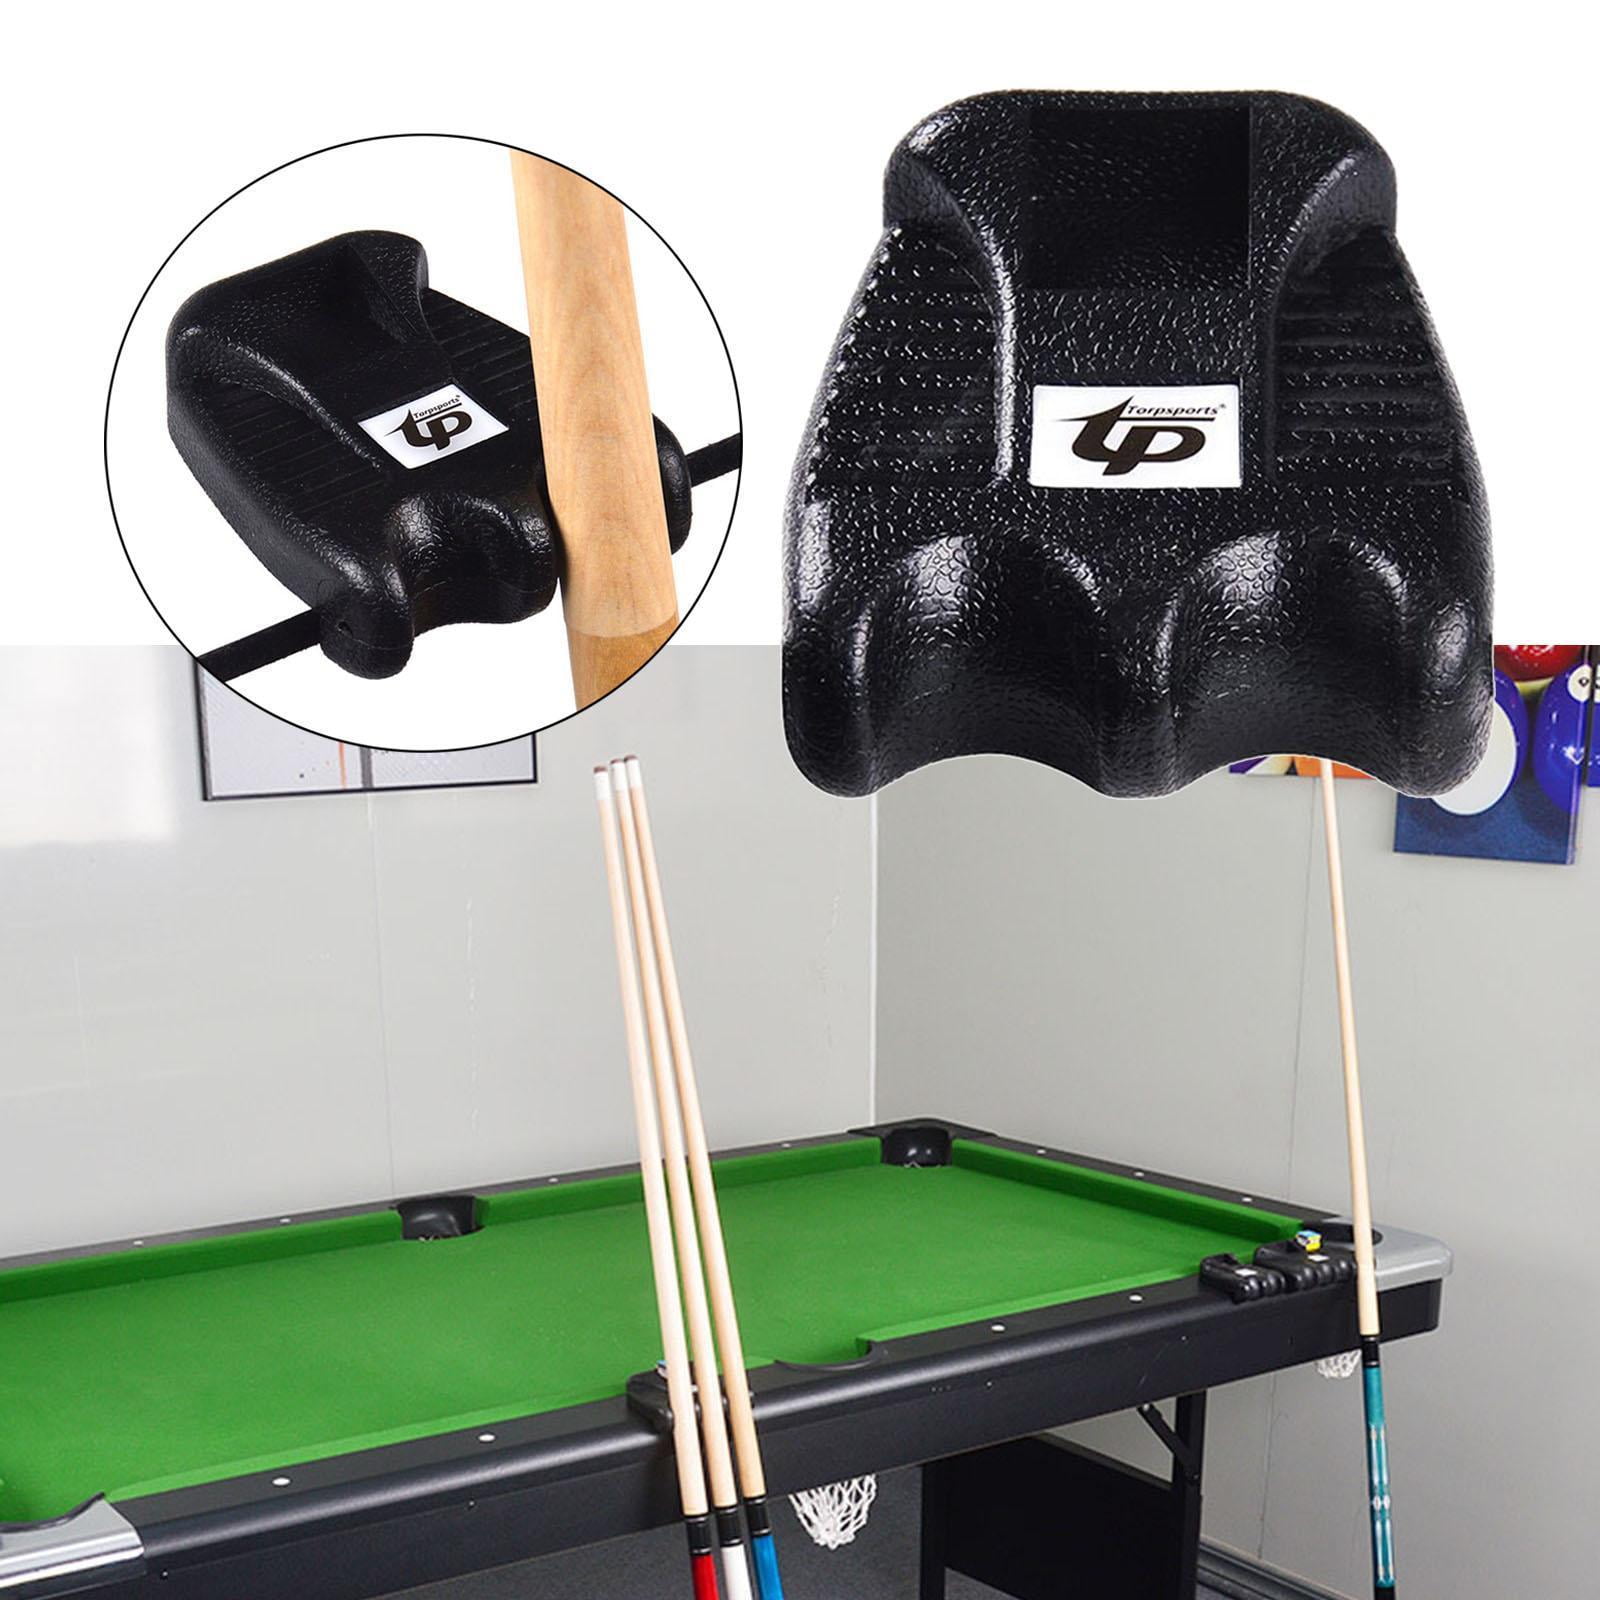 6pcs Snooker Stick Billiards Pool Holder Cue Rack Fishing Rod Carrier Accessory 